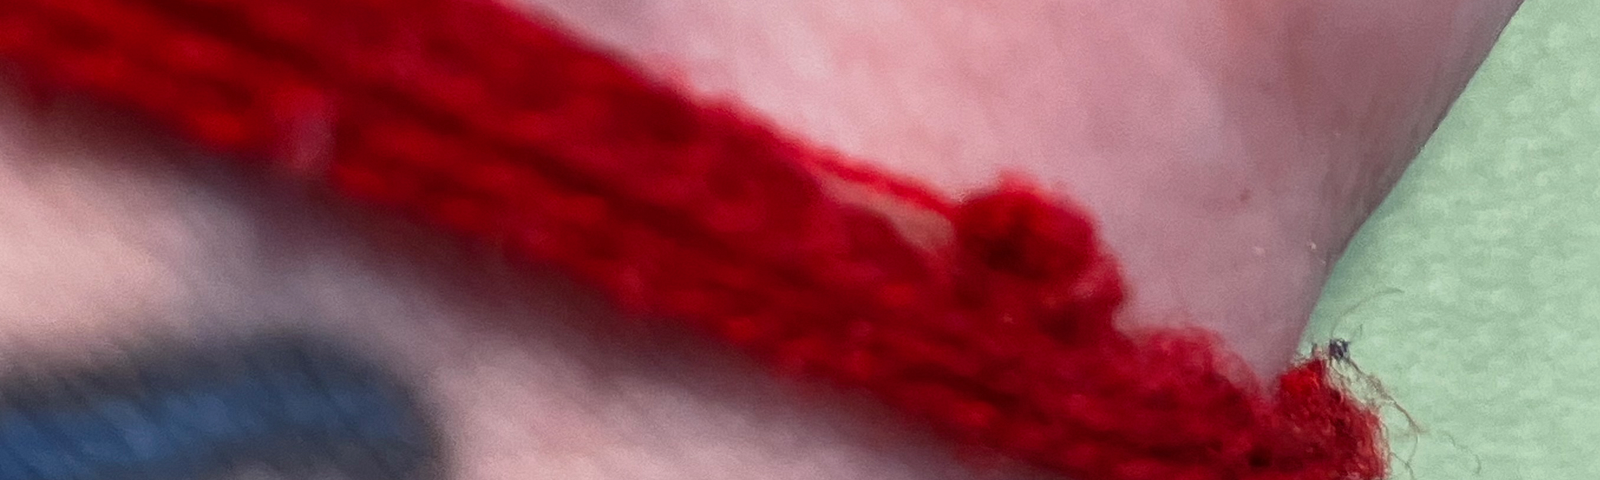 Red string with a single thread attached to the knot wrapped around the wrist of a whit person.